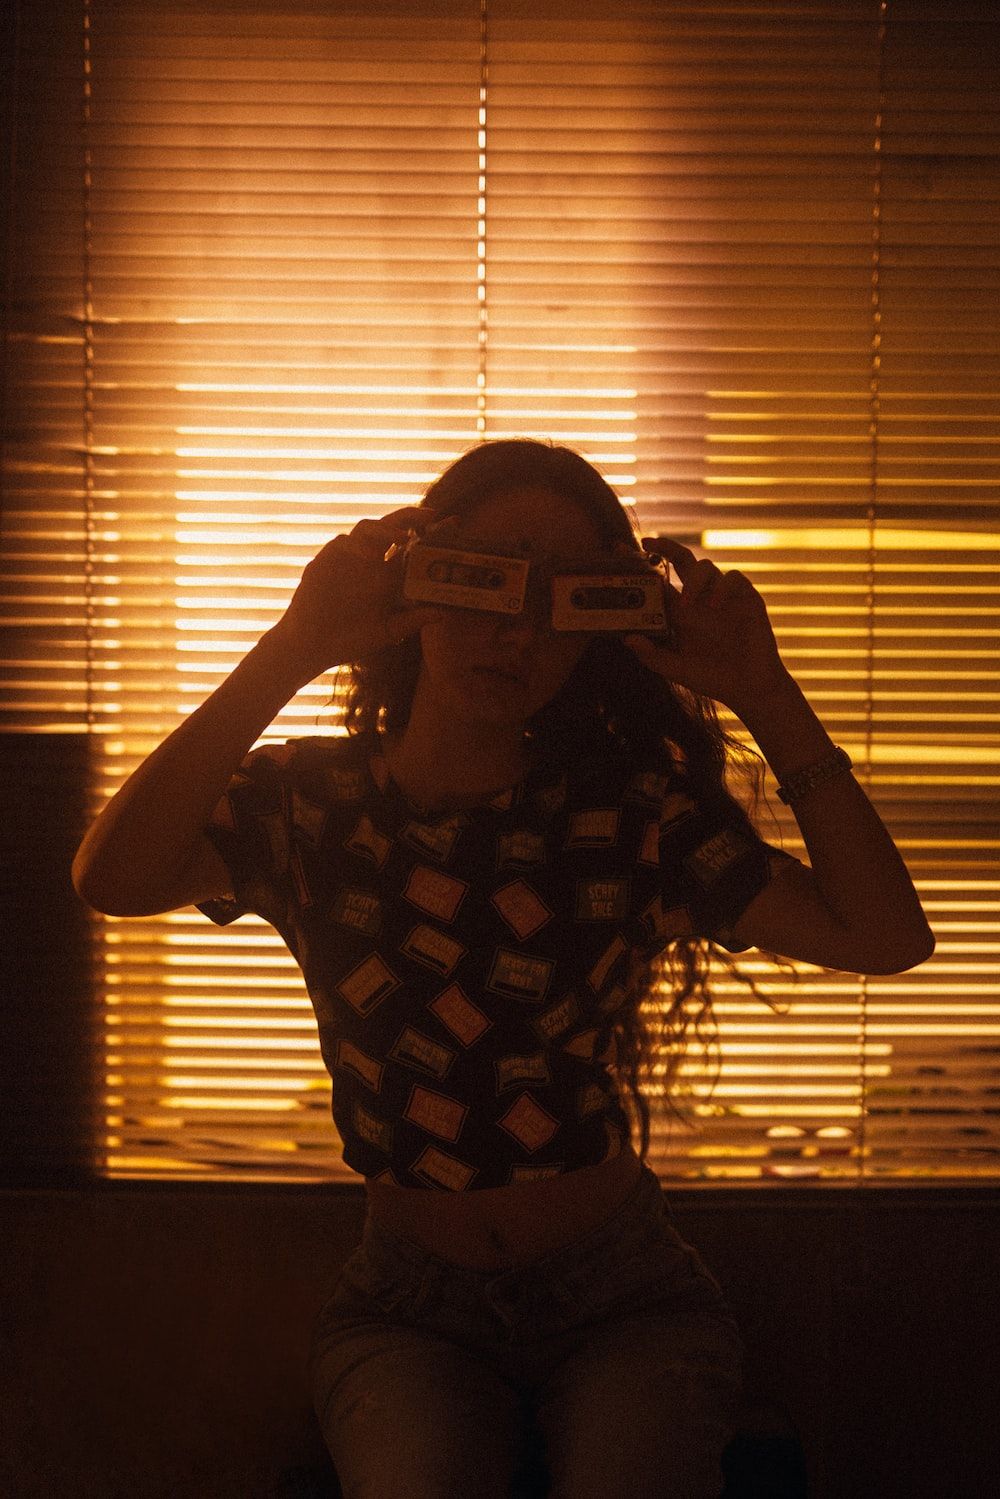 Woman in brown and white checkered crop top holding sunglasses on her forehead - 3D glasses